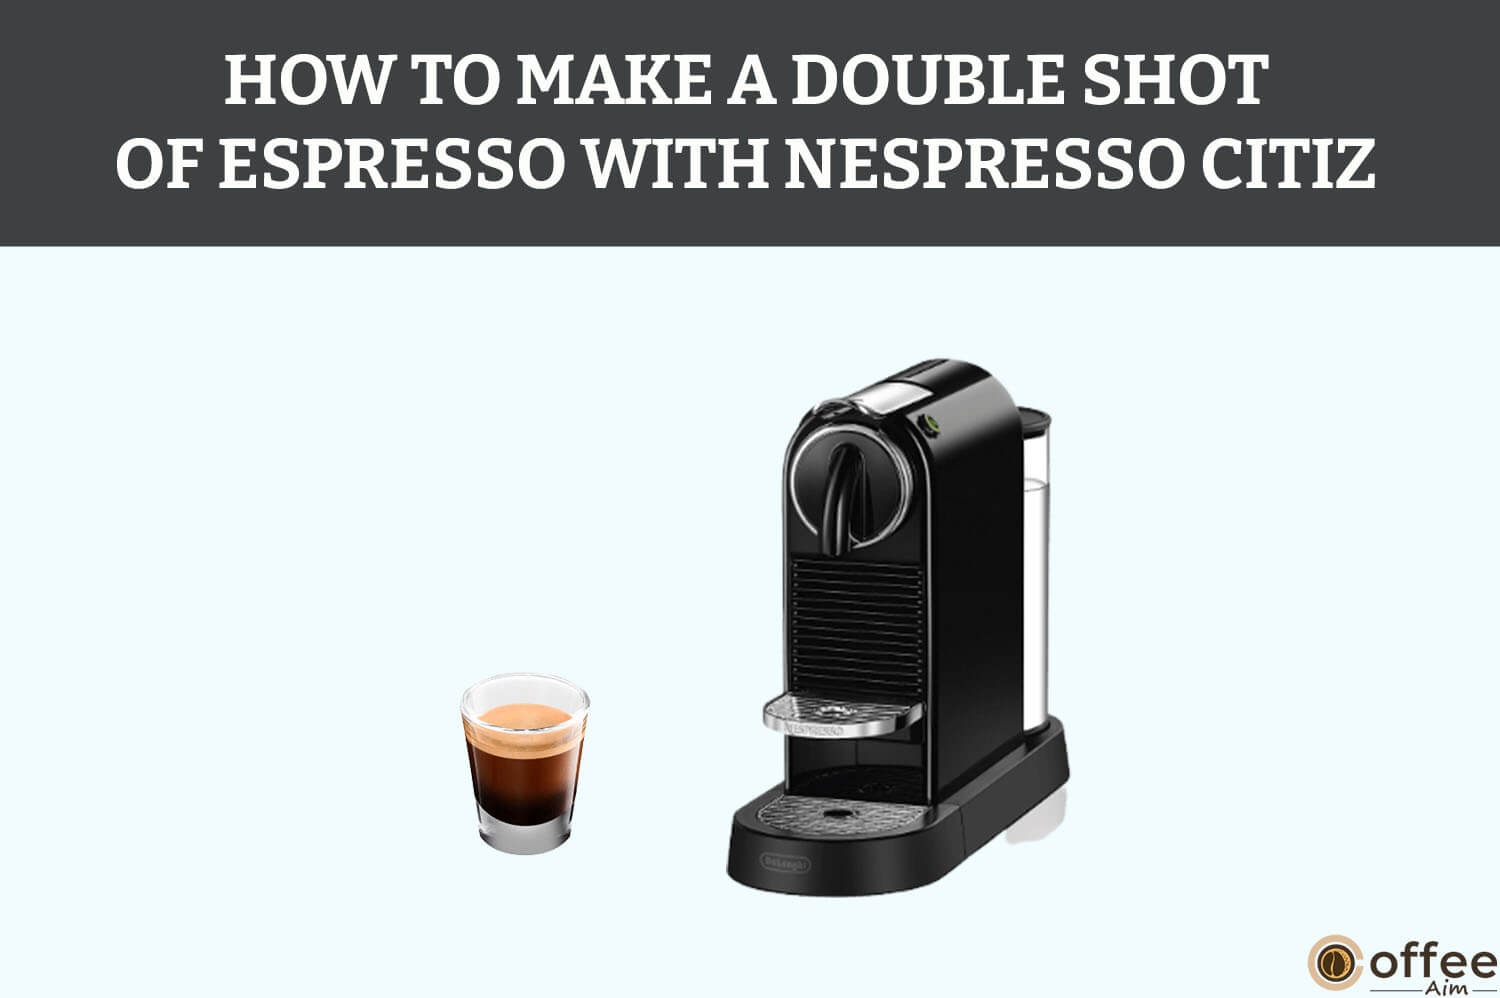 Featured image for the article "How To Make A Double Shot of Espresso With Nespresso CitiZ"